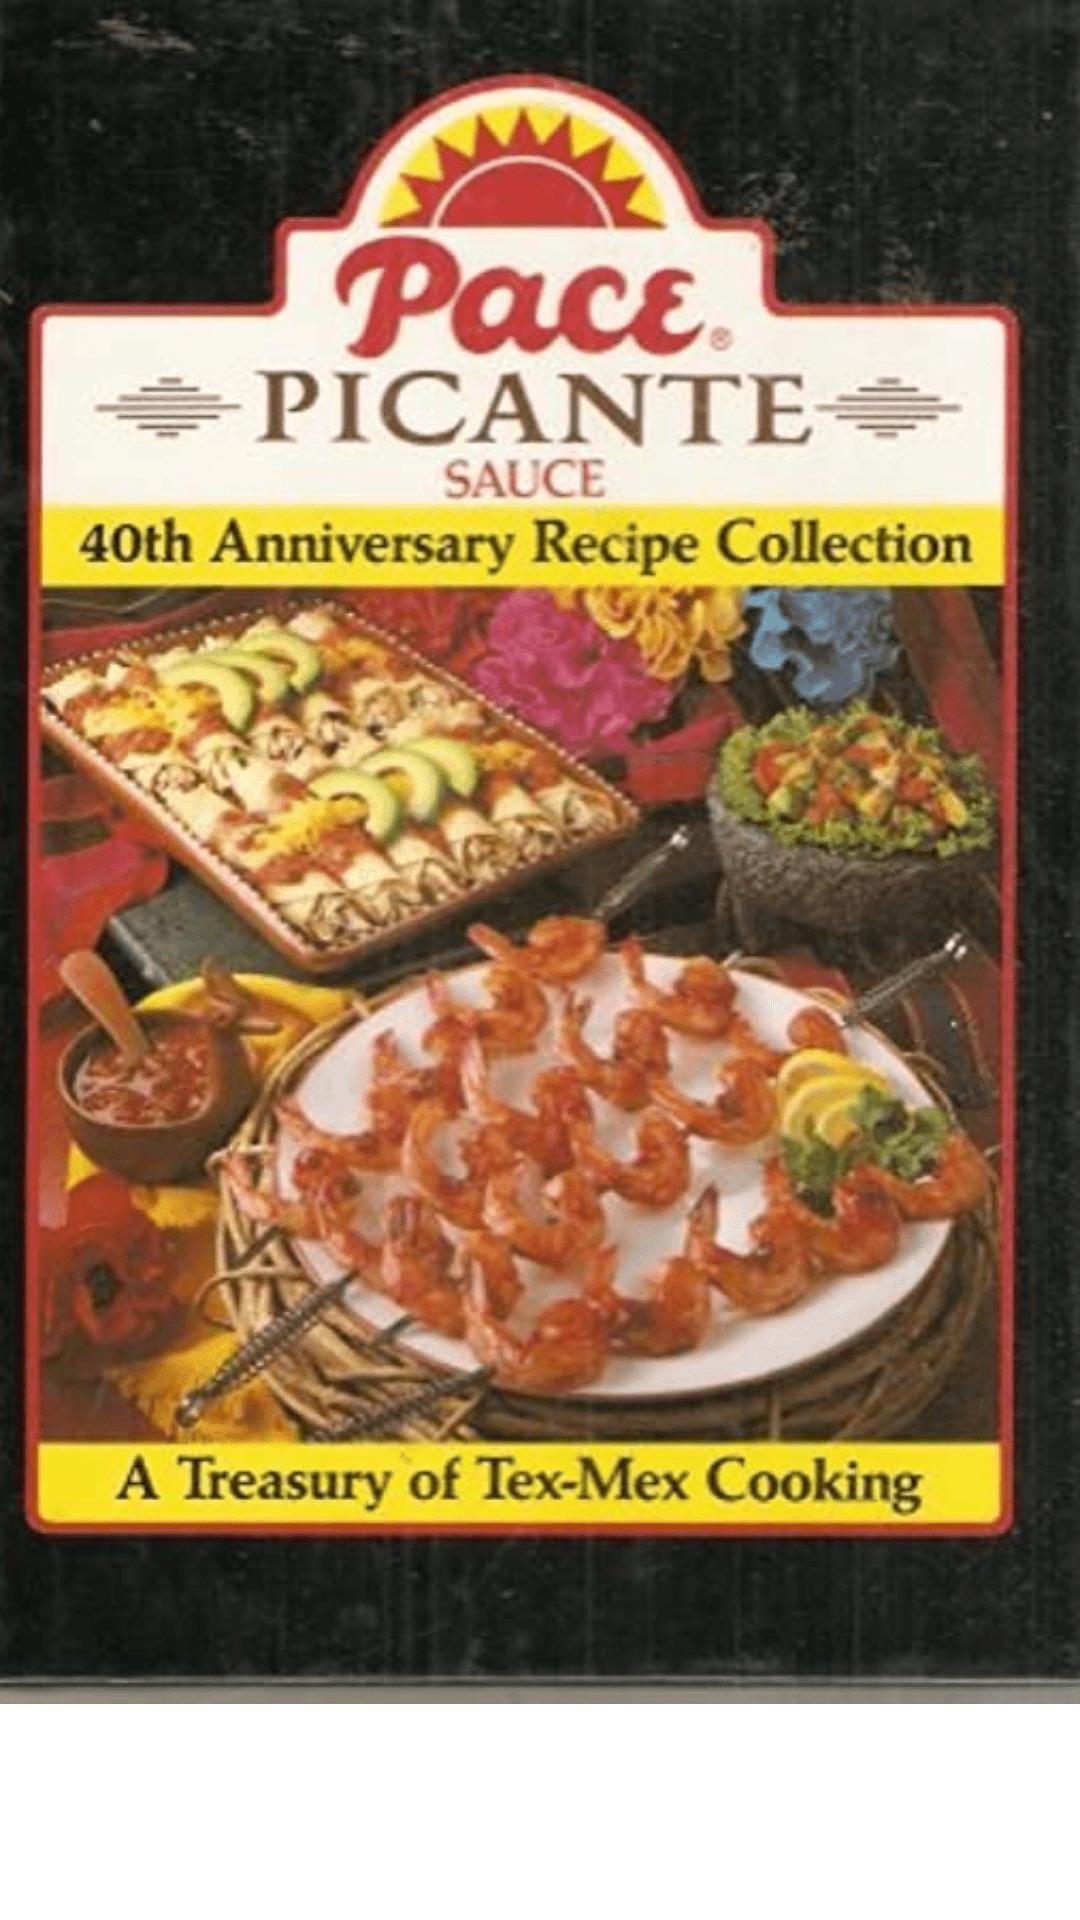 Pace Picante Sauce: 40th Anniversary Recipe Collection; a Treasury of Tex-mex Cooking